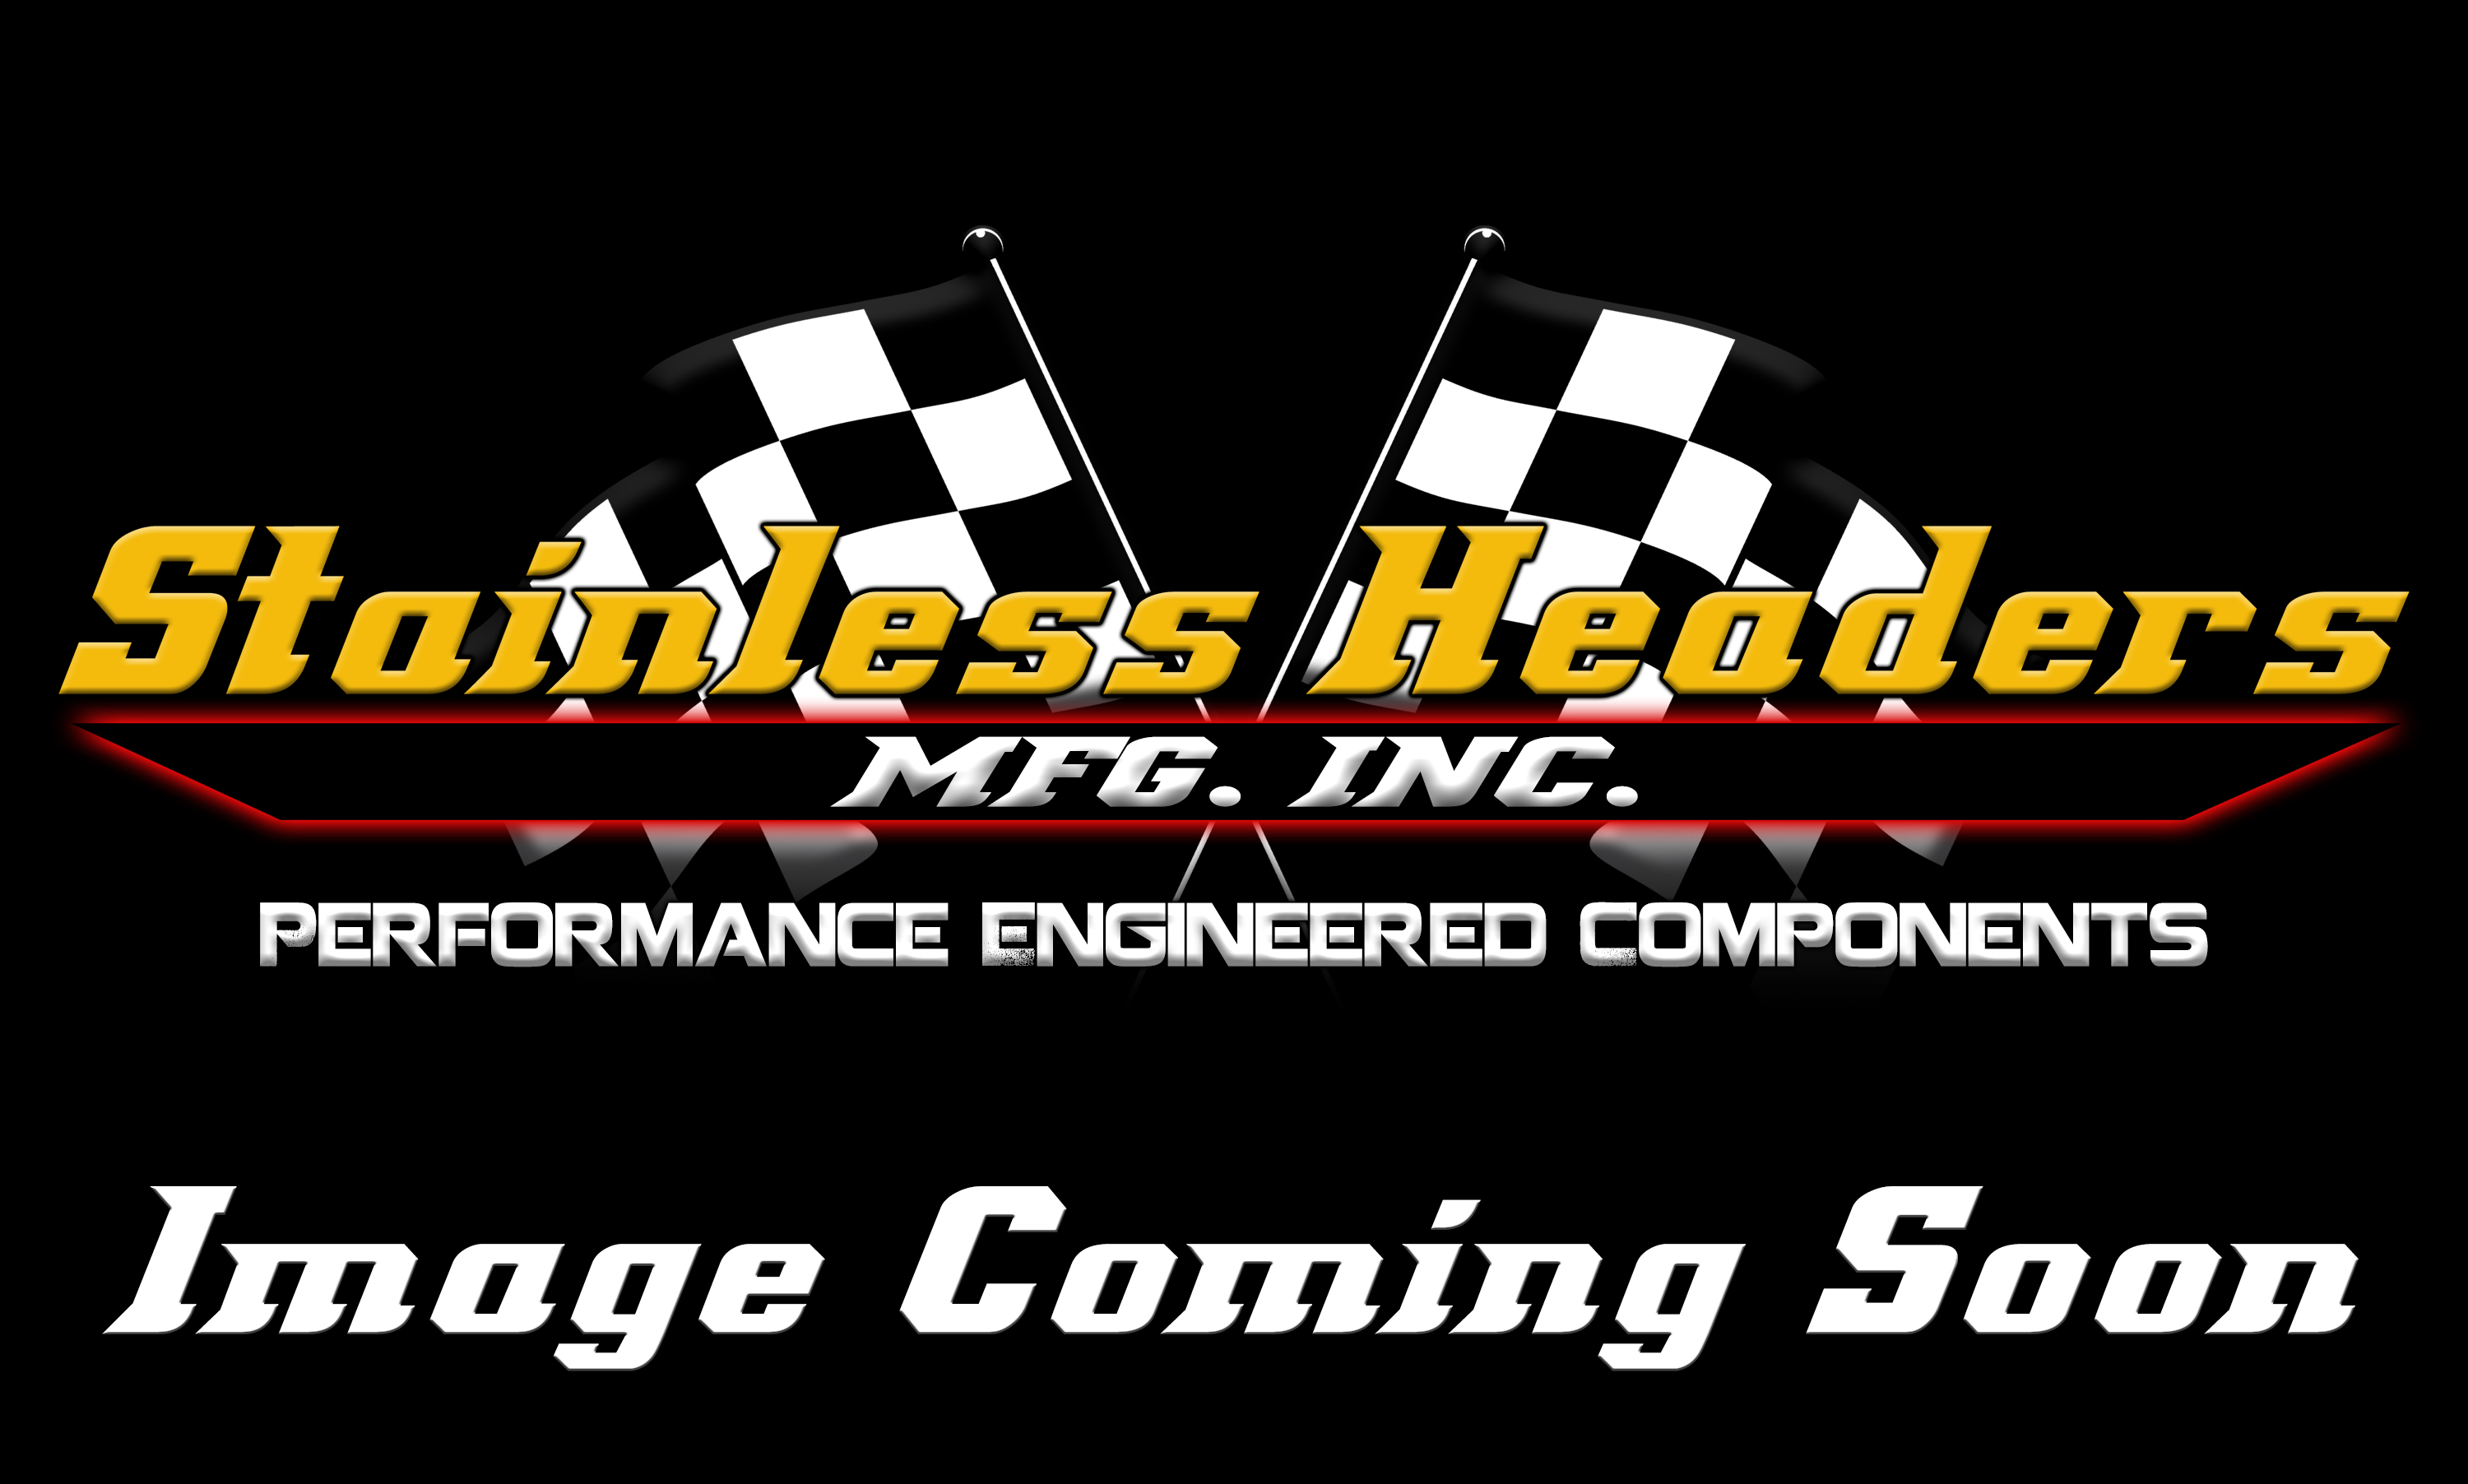 Stainless Headers - 1 1/2" Primary 6 into 1 Performance Merge Collector-16ga 321ss